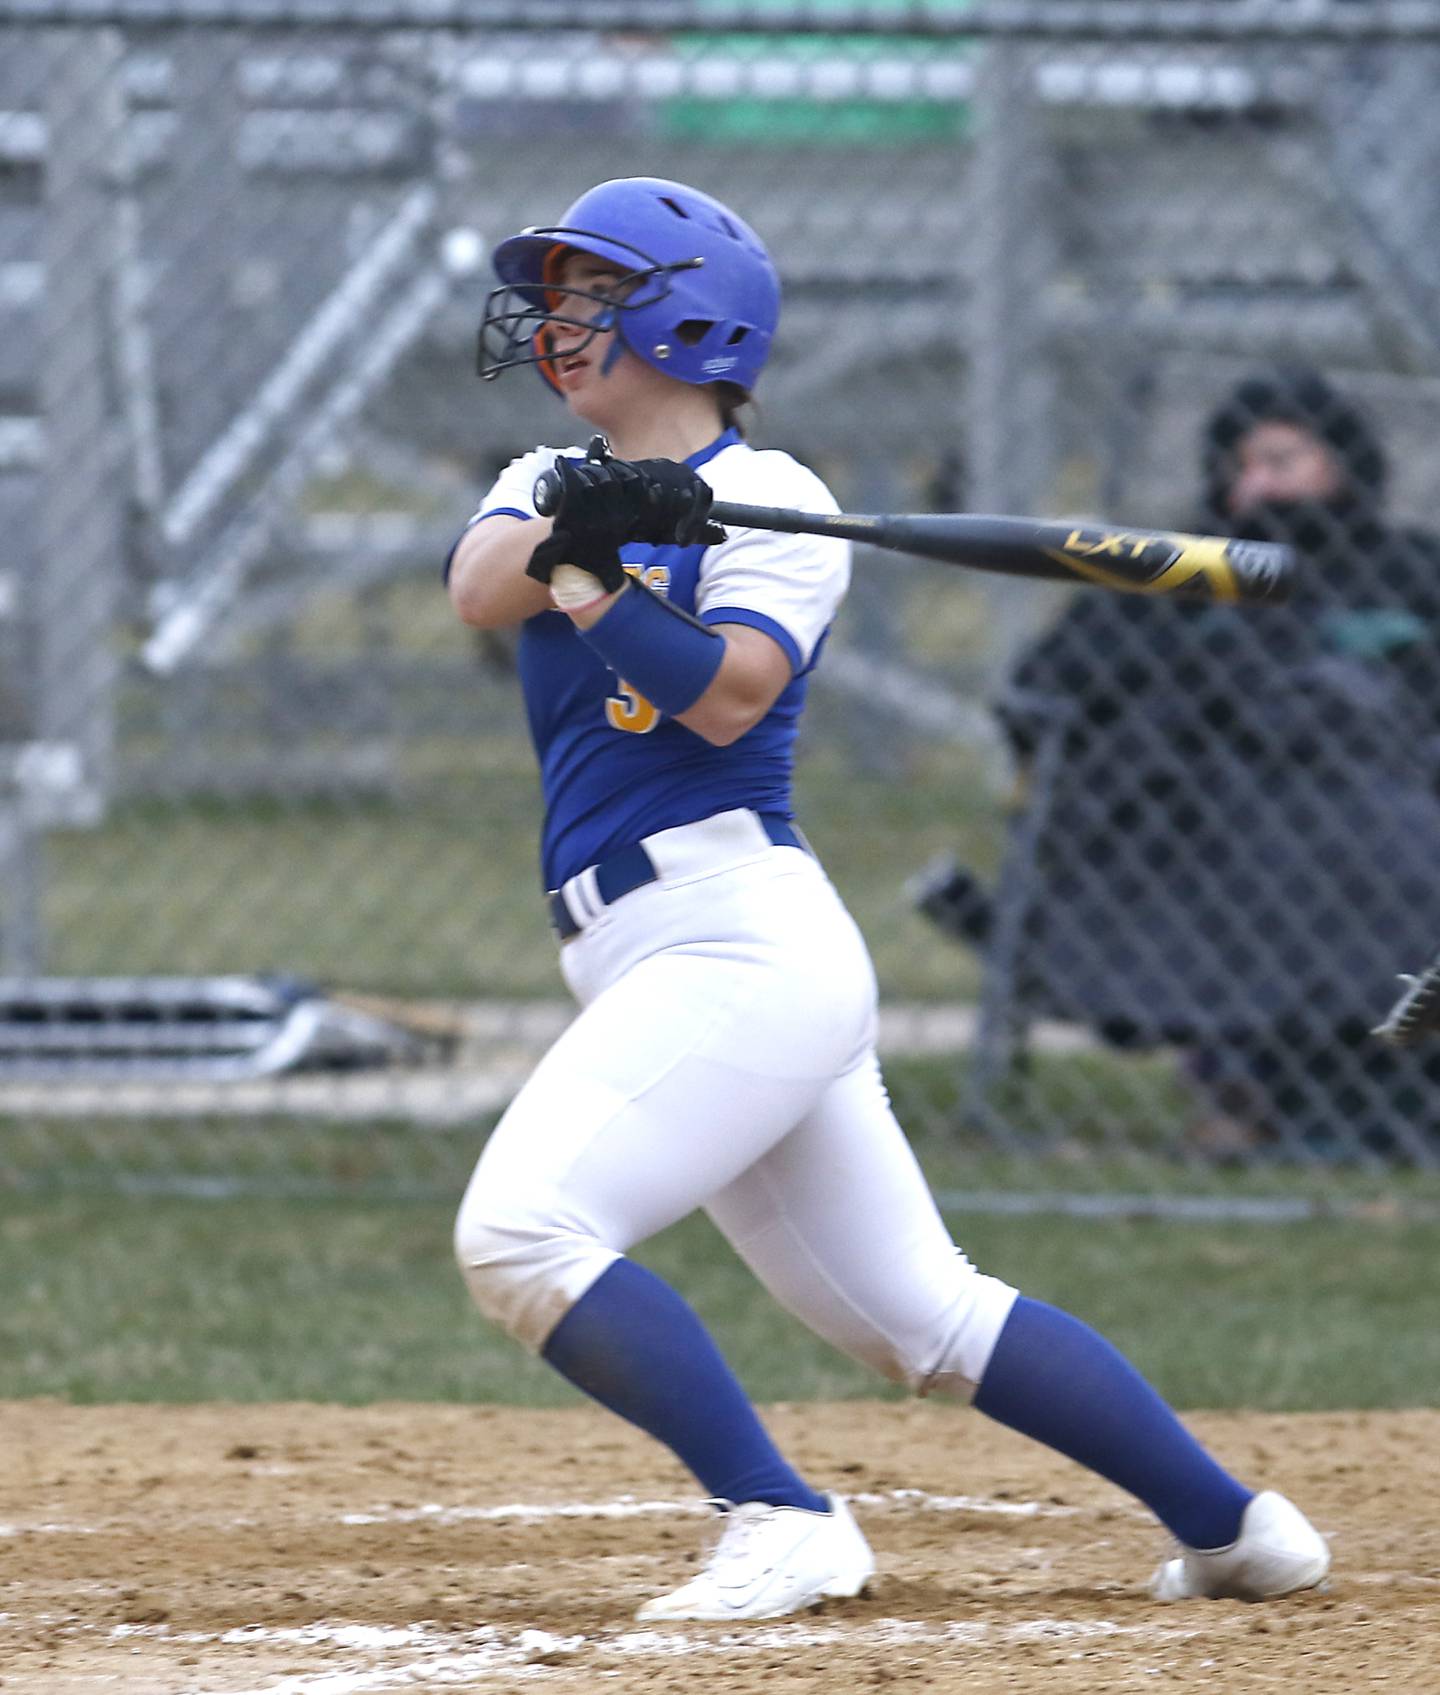 Johnsburg’s Brooke Klosowicz watches her home run fly during a Kishwaukee River Conference softball game Tuesday, April 12, 2022, between Marengo and Johnsburg at Hiller Park in Johnsburg.